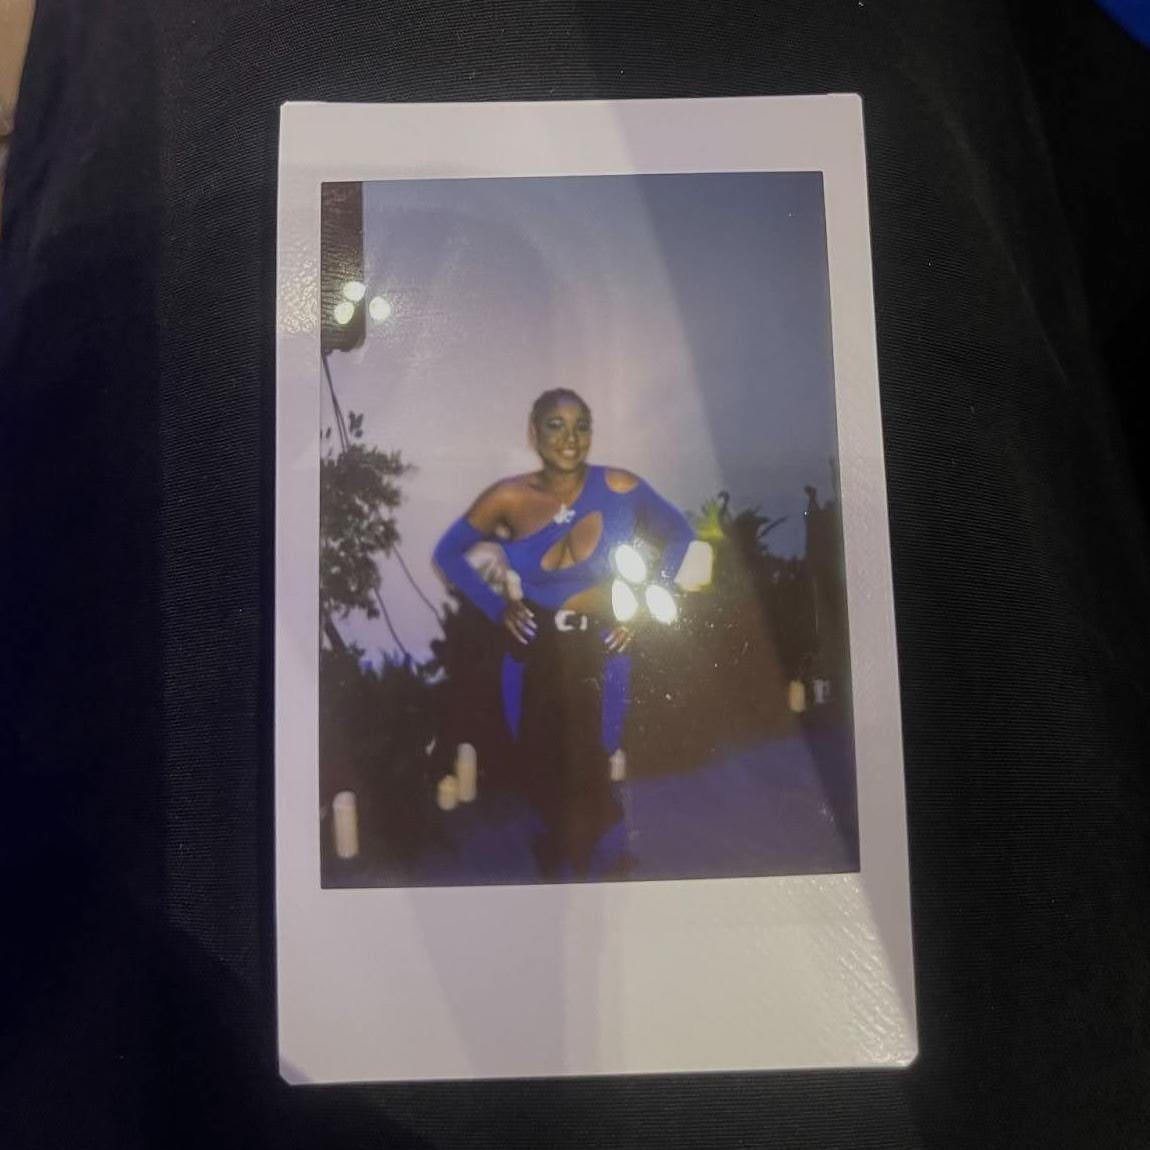 A photo of Kamira Roberson posing for a polaroid picture while wearing a blue cutout top.